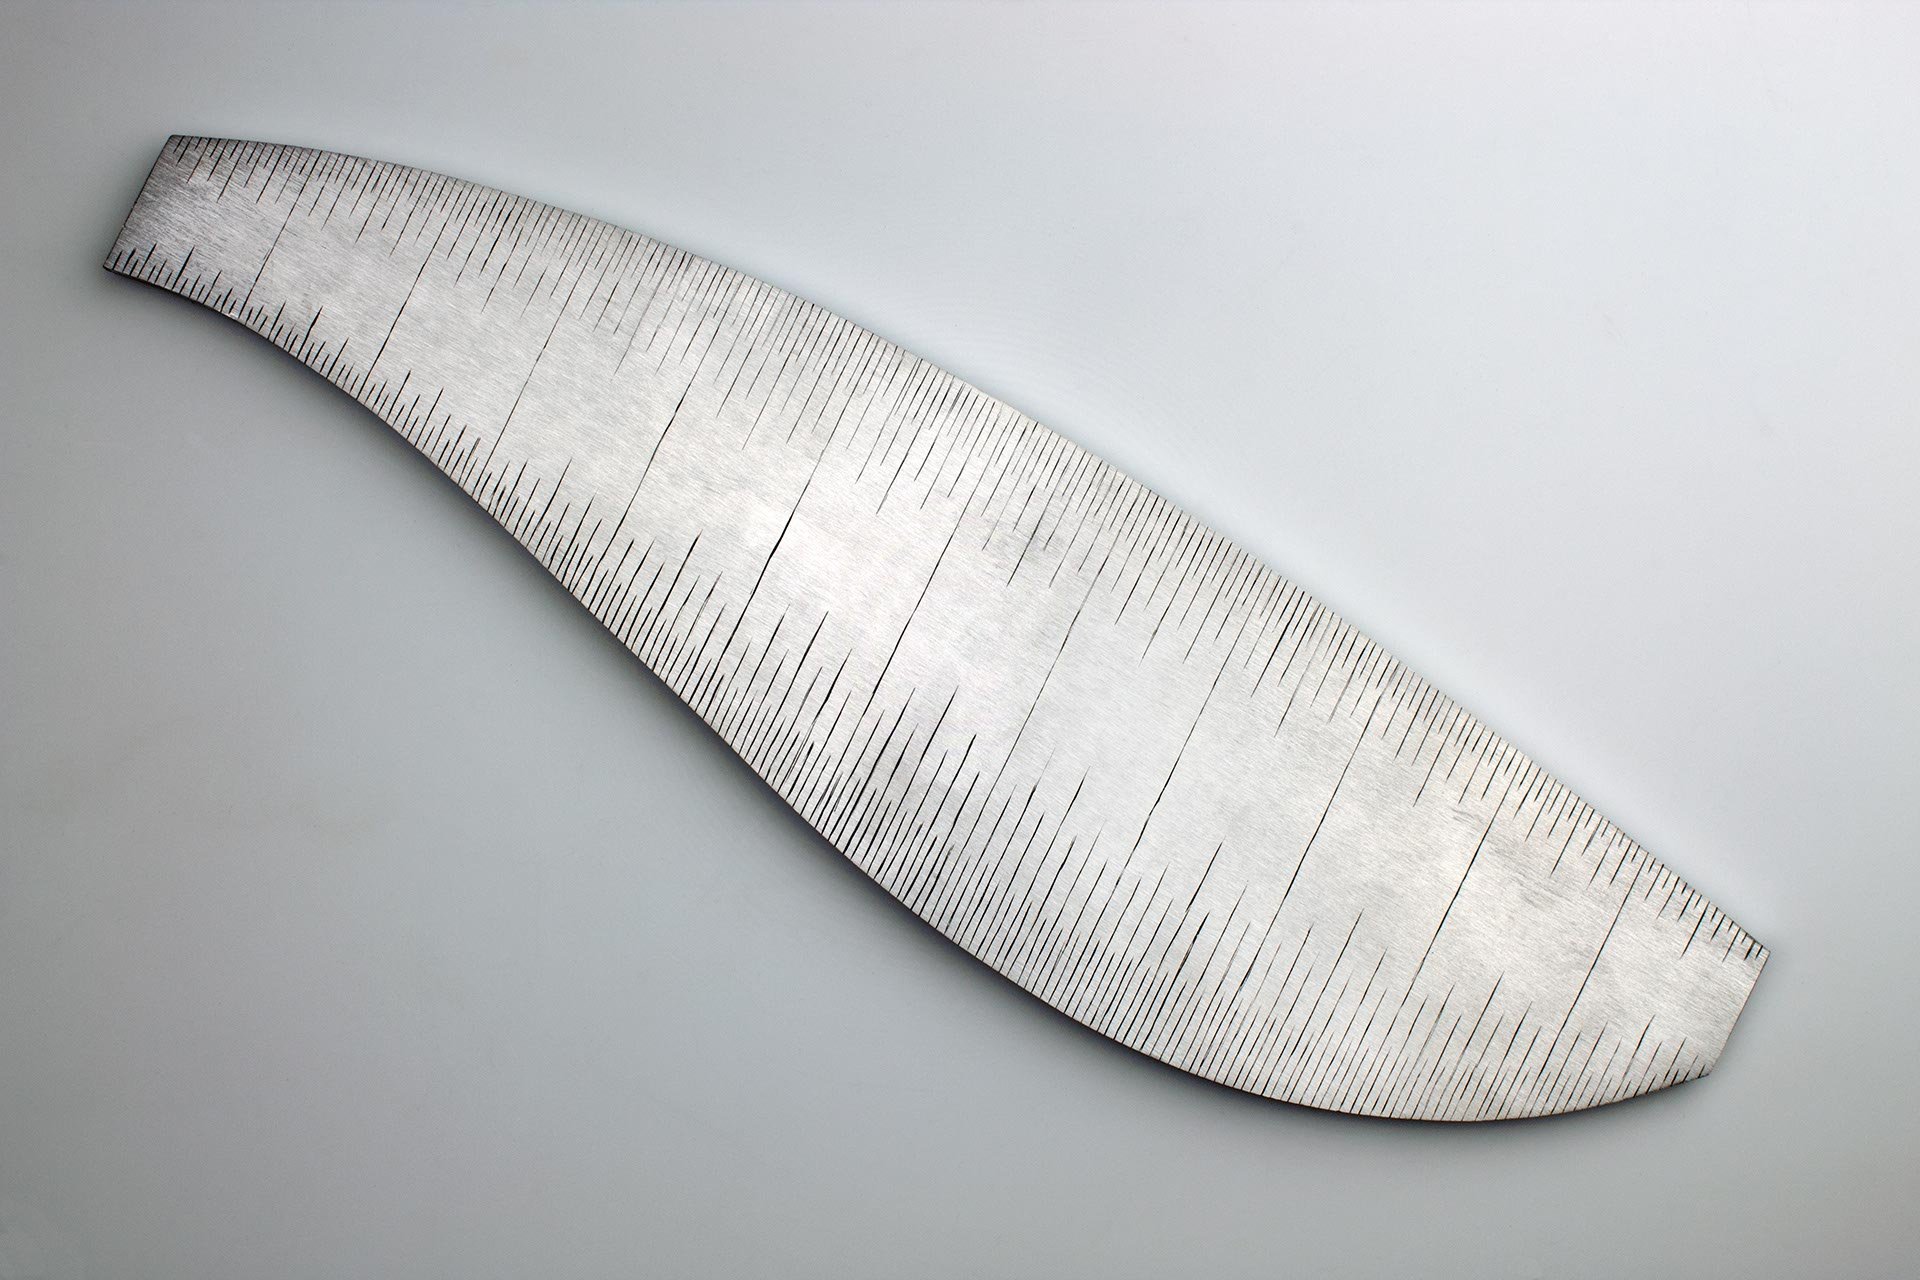 Instrument #84, hand engraved aluminum and ink, 12" x 2.5" x .25"